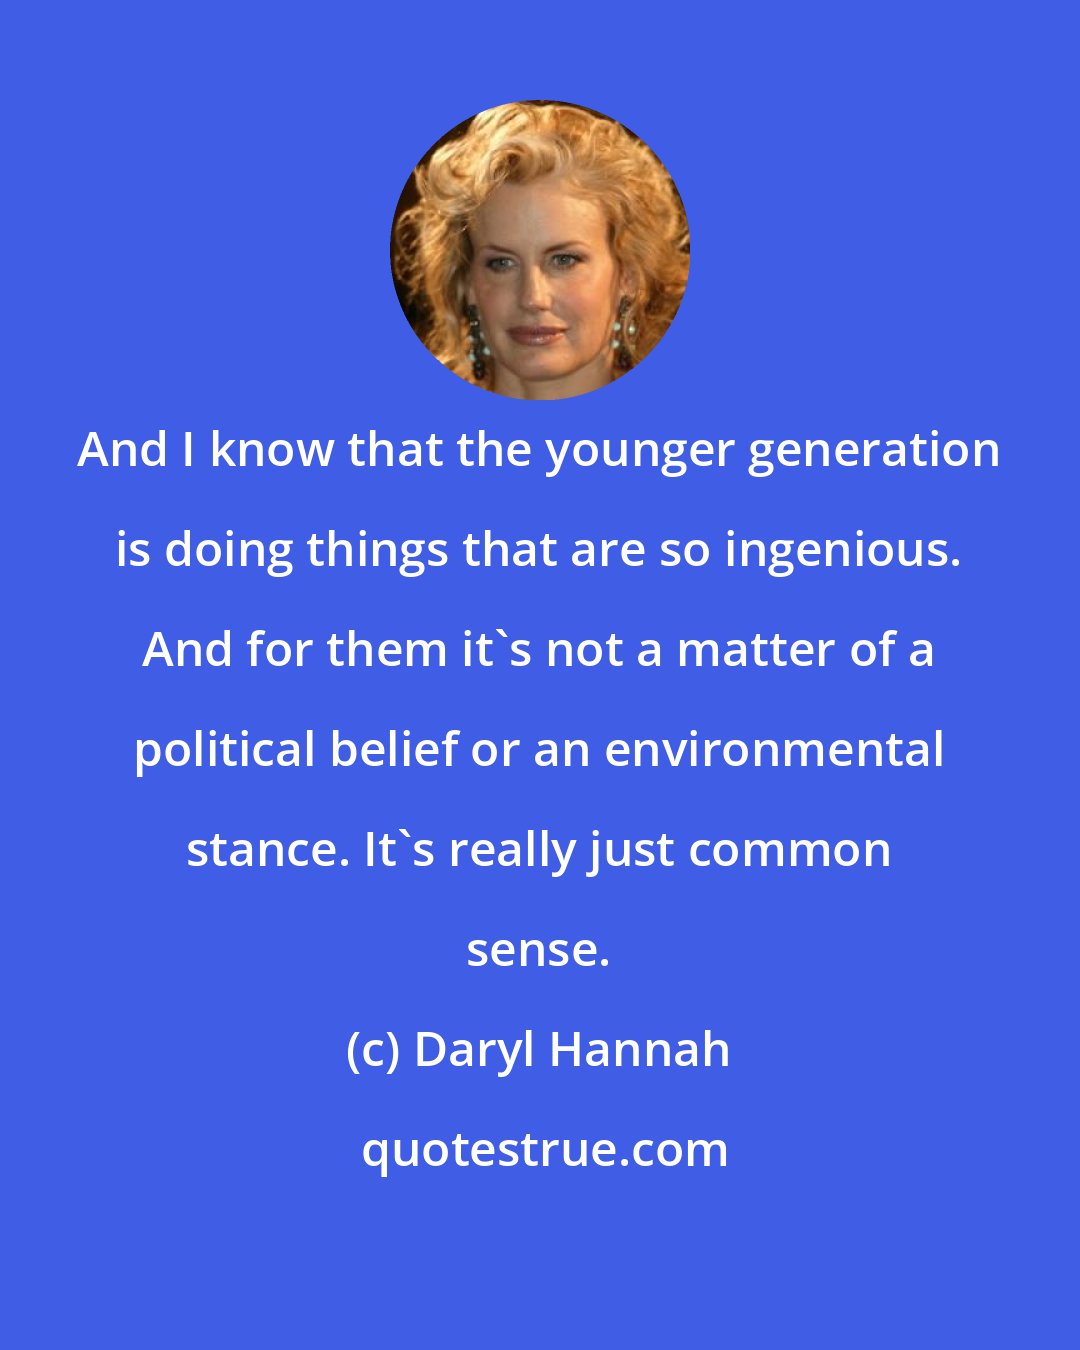 Daryl Hannah: And I know that the younger generation is doing things that are so ingenious. And for them it's not a matter of a political belief or an environmental stance. It's really just common sense.